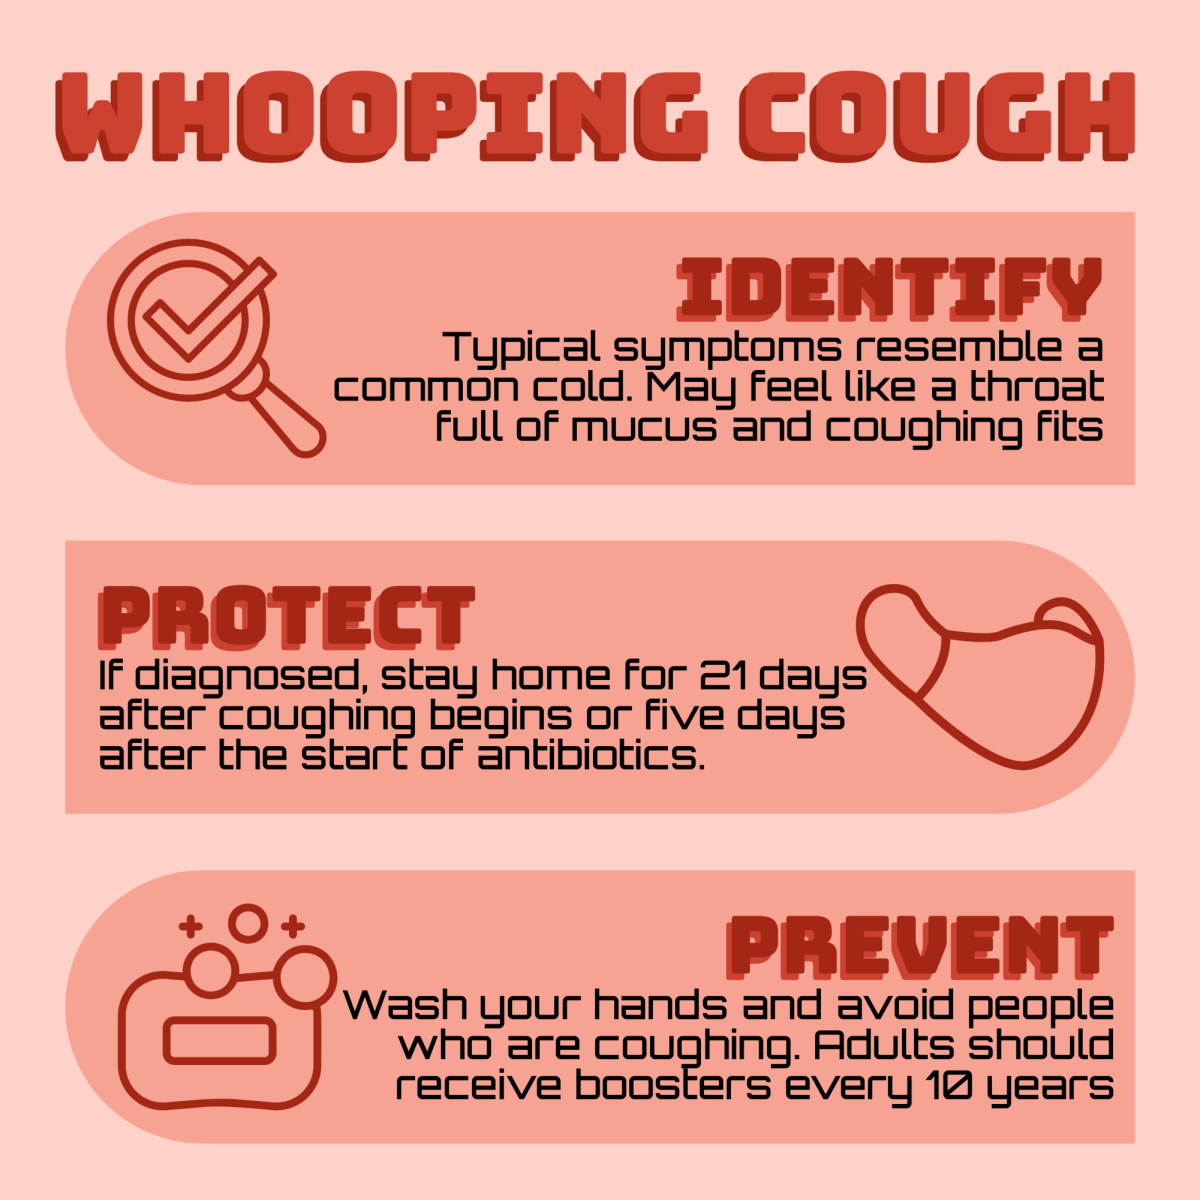 Nothing+to+Whoop+About%3A+High+Schoolers+Getting+Whooping+Cough